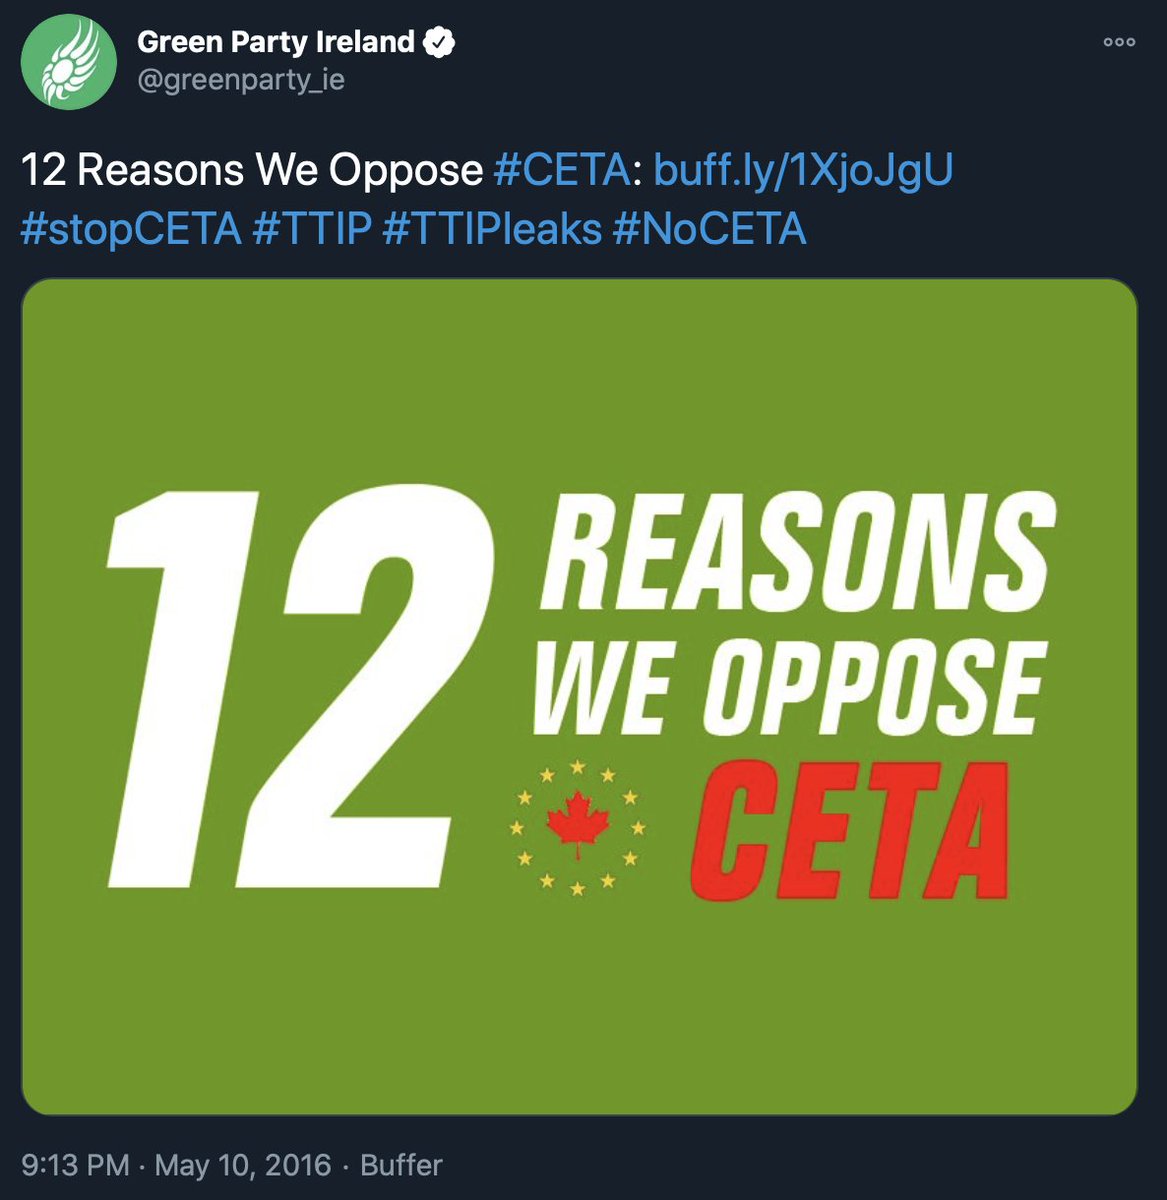 Along with the socialist left and Sinn Féin, the Green Party maintained a position of clear opposition to CETA. They ran a "12 Reasons We Oppose CETA" campaign. They are now, all too predictably, part of the government proposing to push it through.